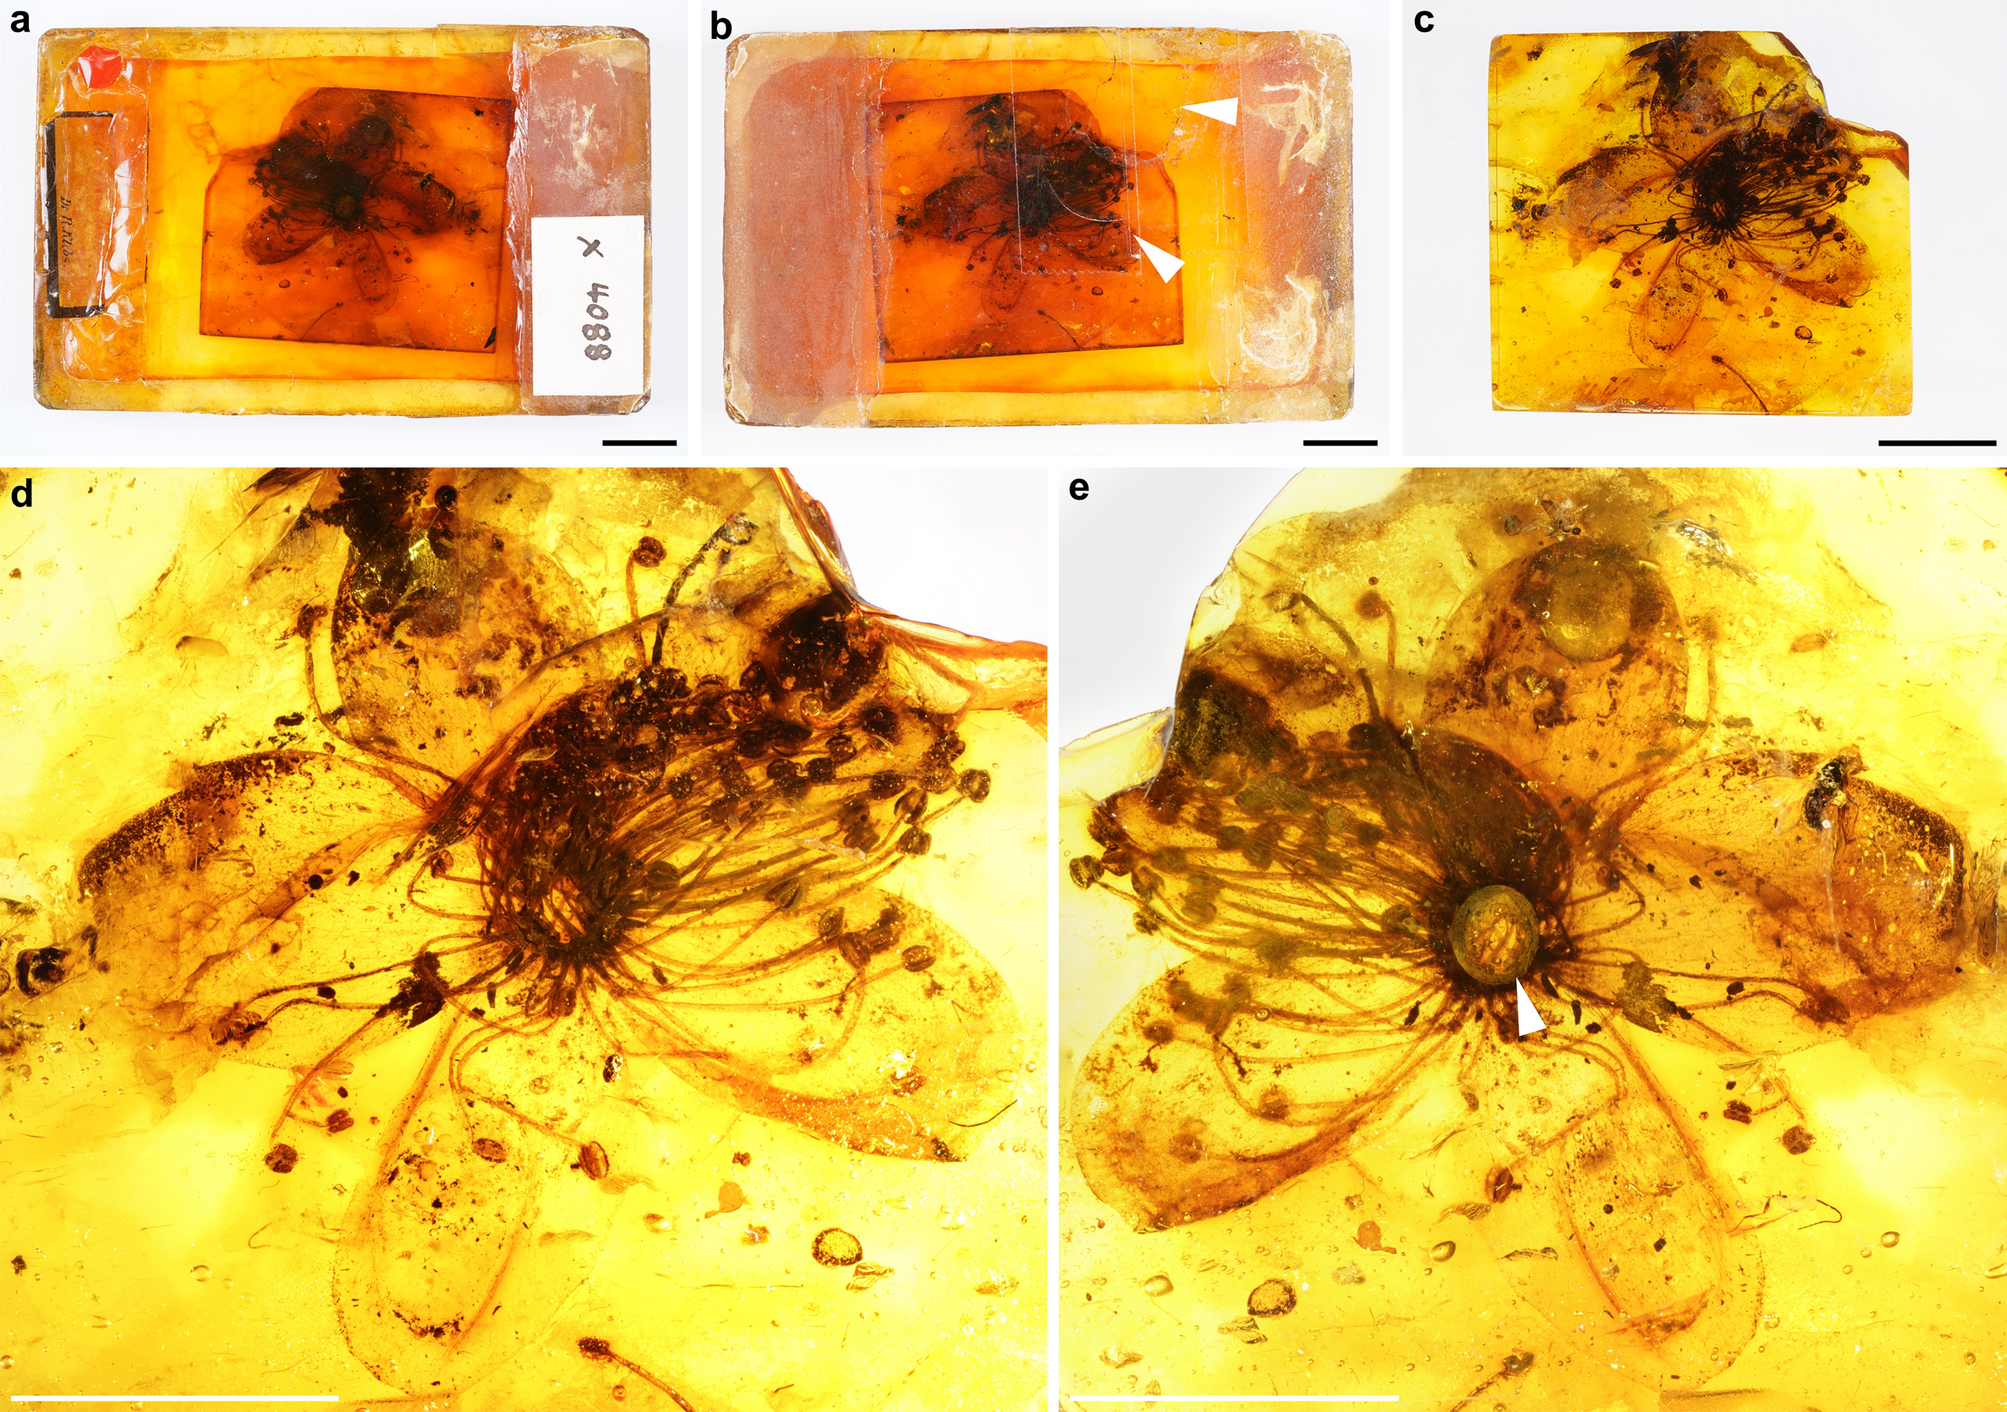 Origin Of Species Ch 65 The largest amber-preserved flower revisited | Scientific Reports